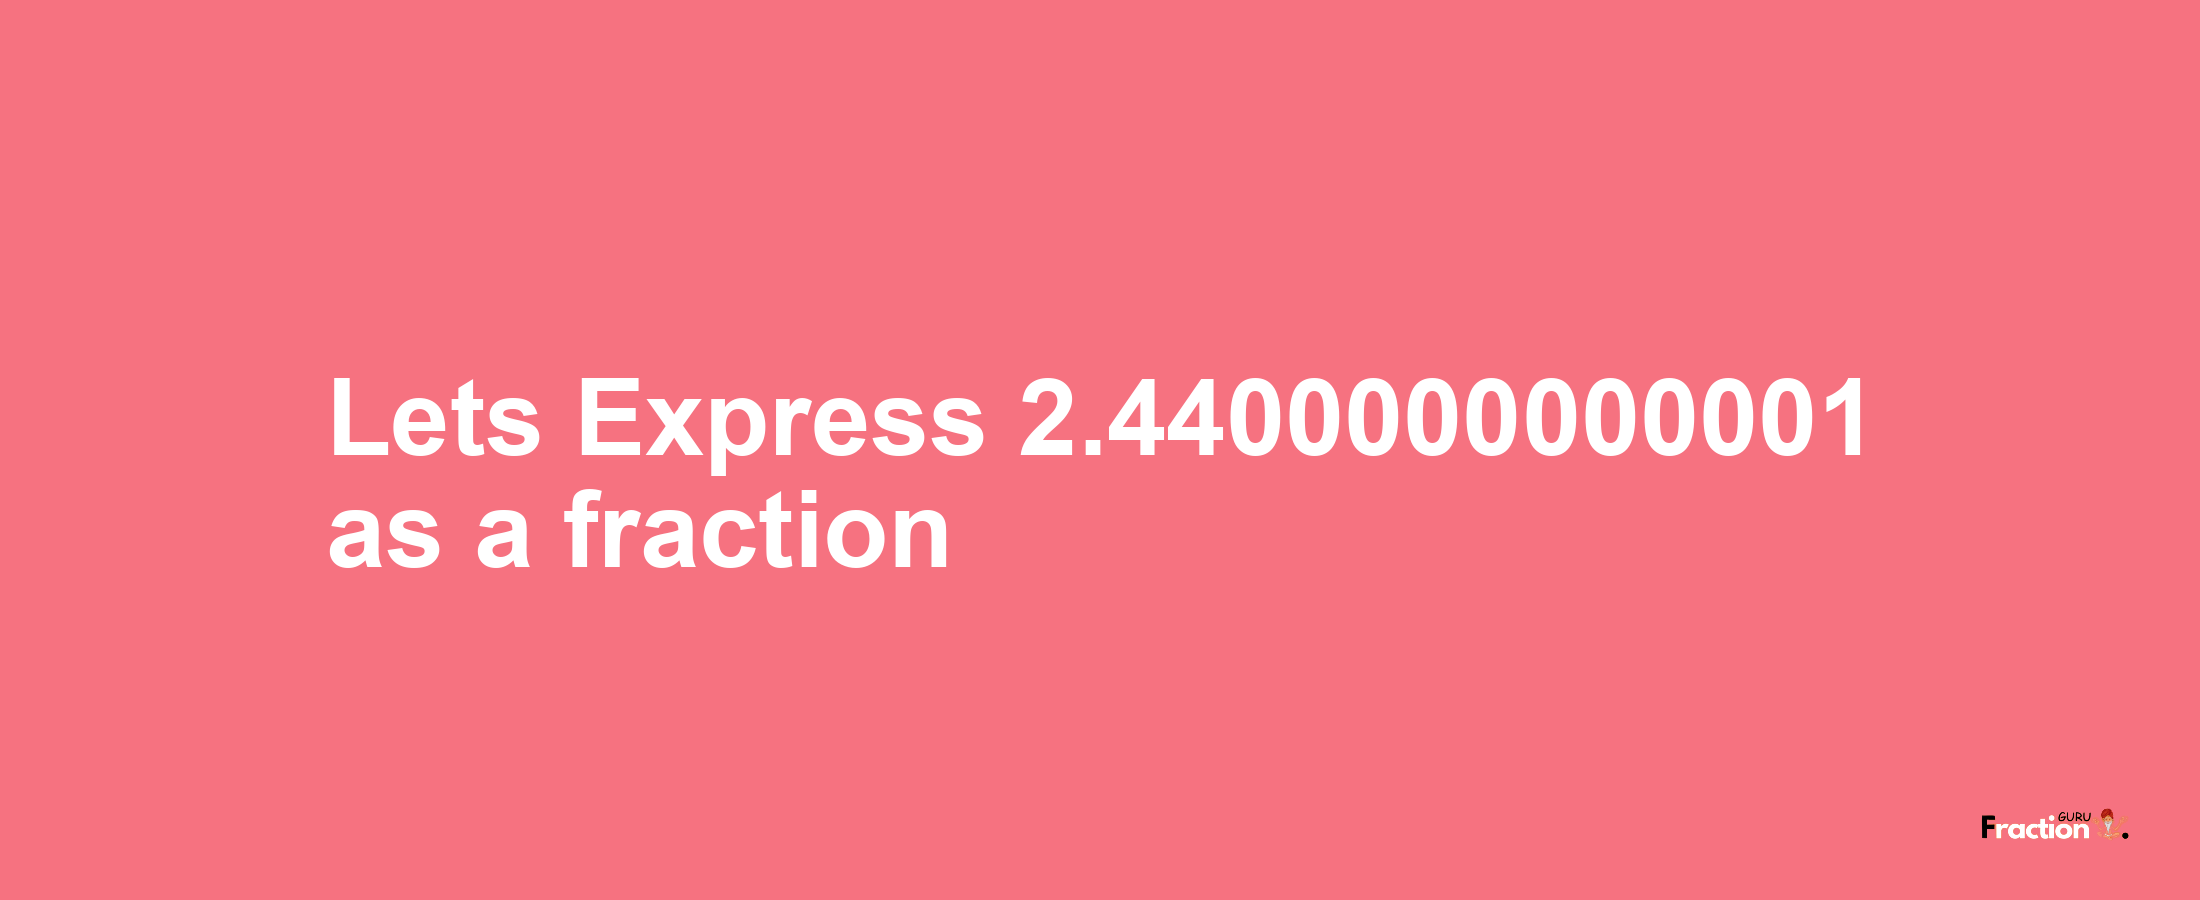 Lets Express 2.4400000000001 as afraction